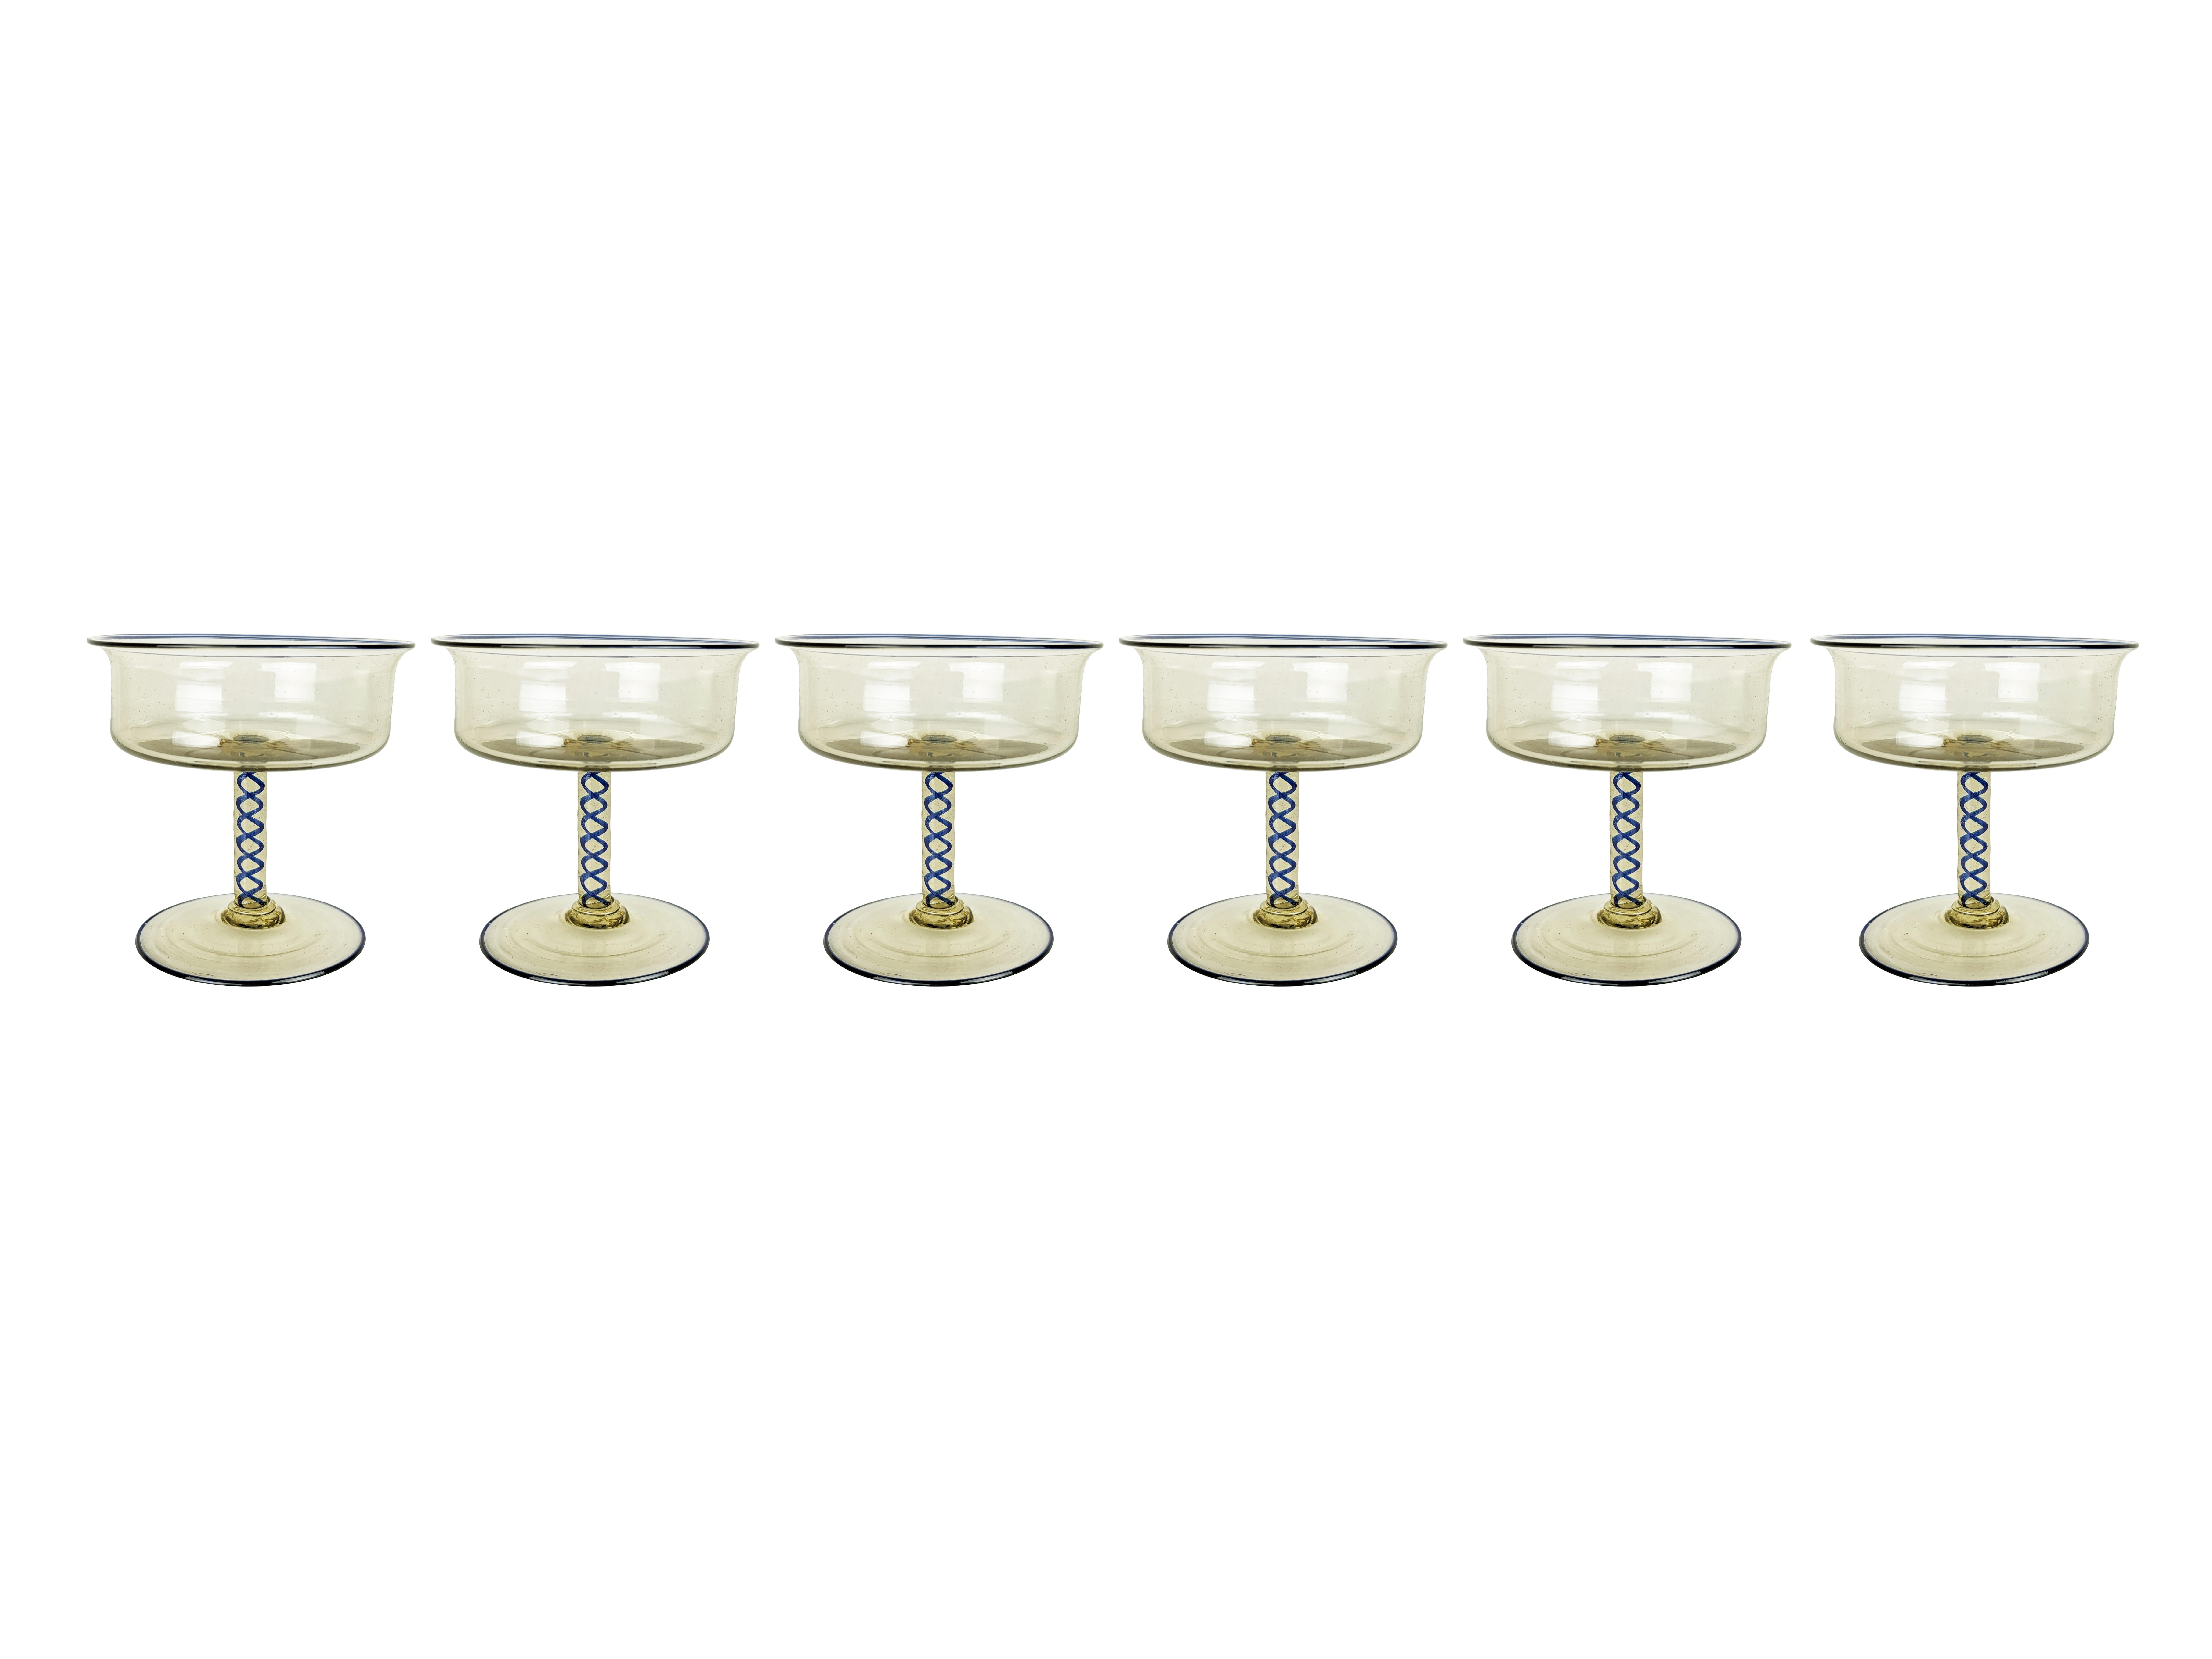 Hand-Crafted rare set of 18 Murano glass goblets by Vittorio Zecchin for Pauly & Co, 1930s For Sale